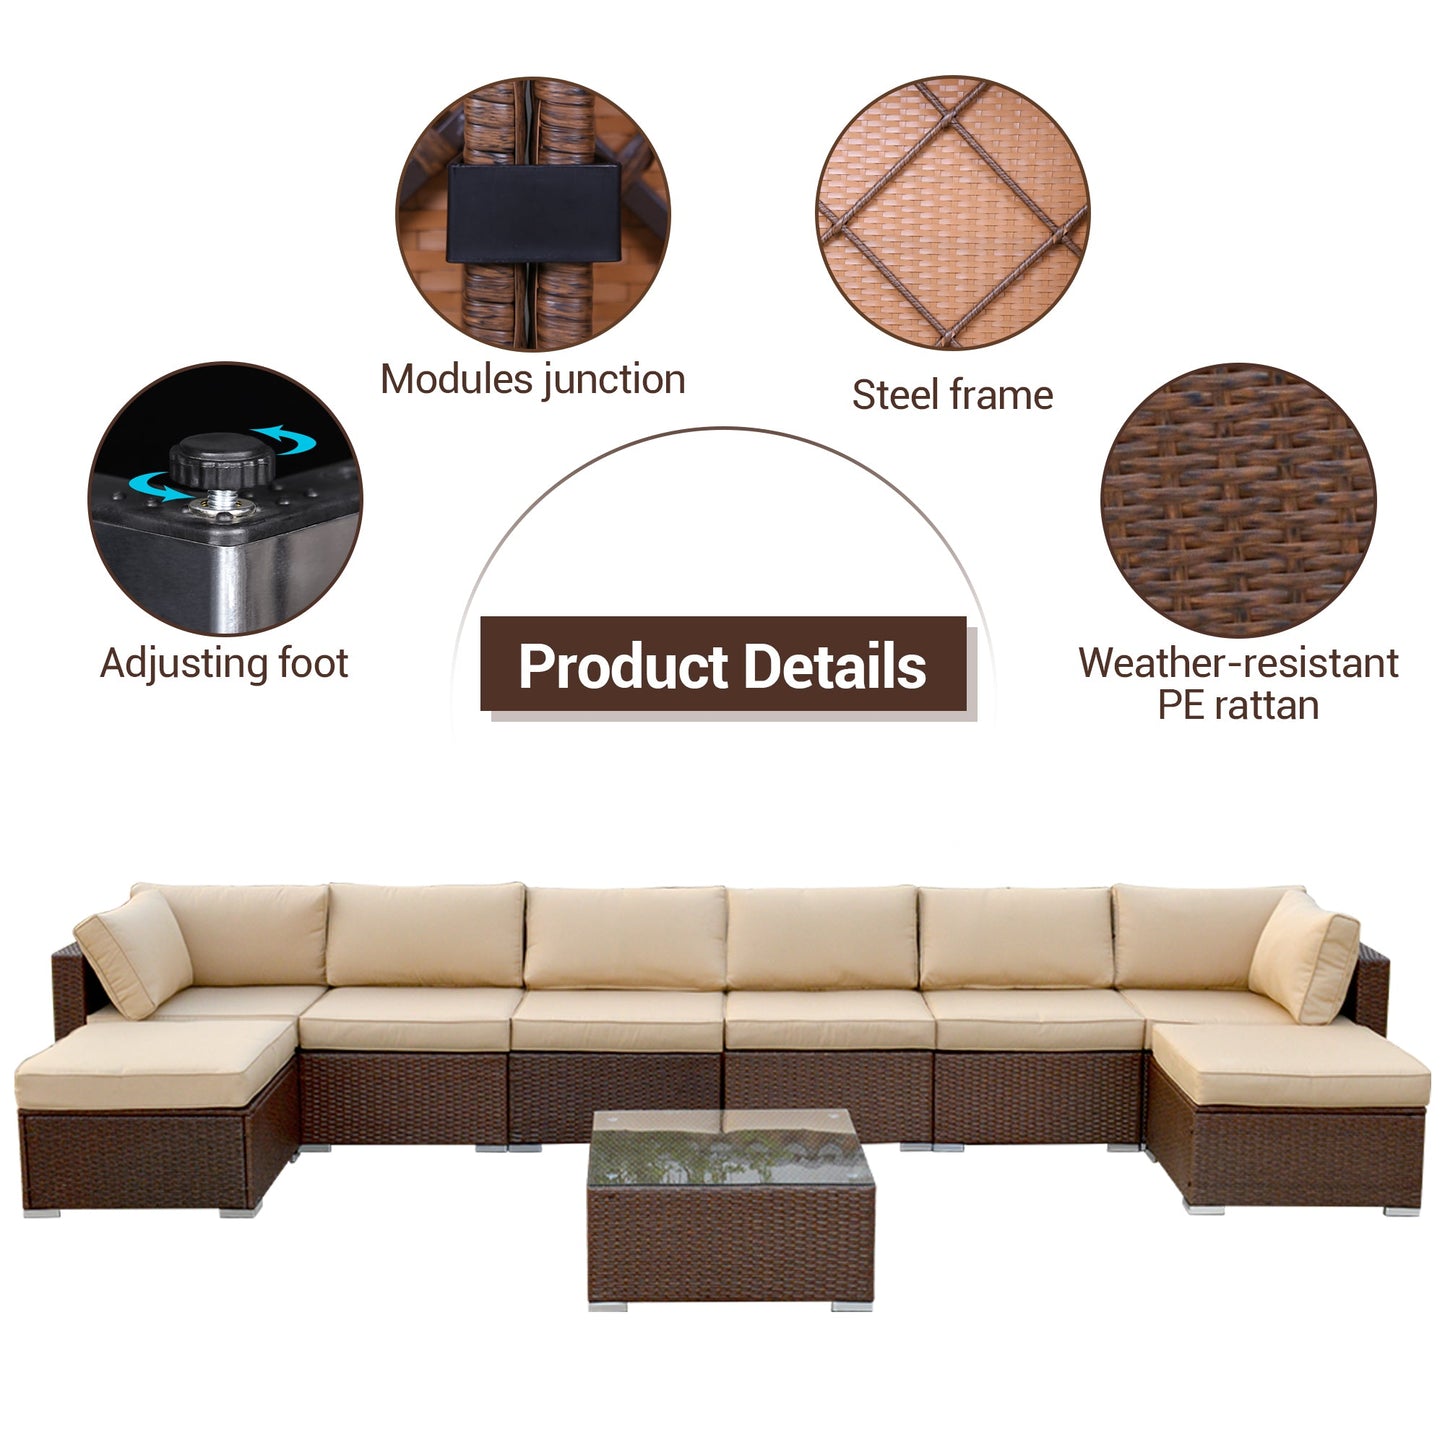 Patio Furniture Sets 9 Piece Outdoor Conversation Set, All Weather Brown PE Wicker Furniture Set with Glass Table, Ottoman Sofas, Removabl Cushions